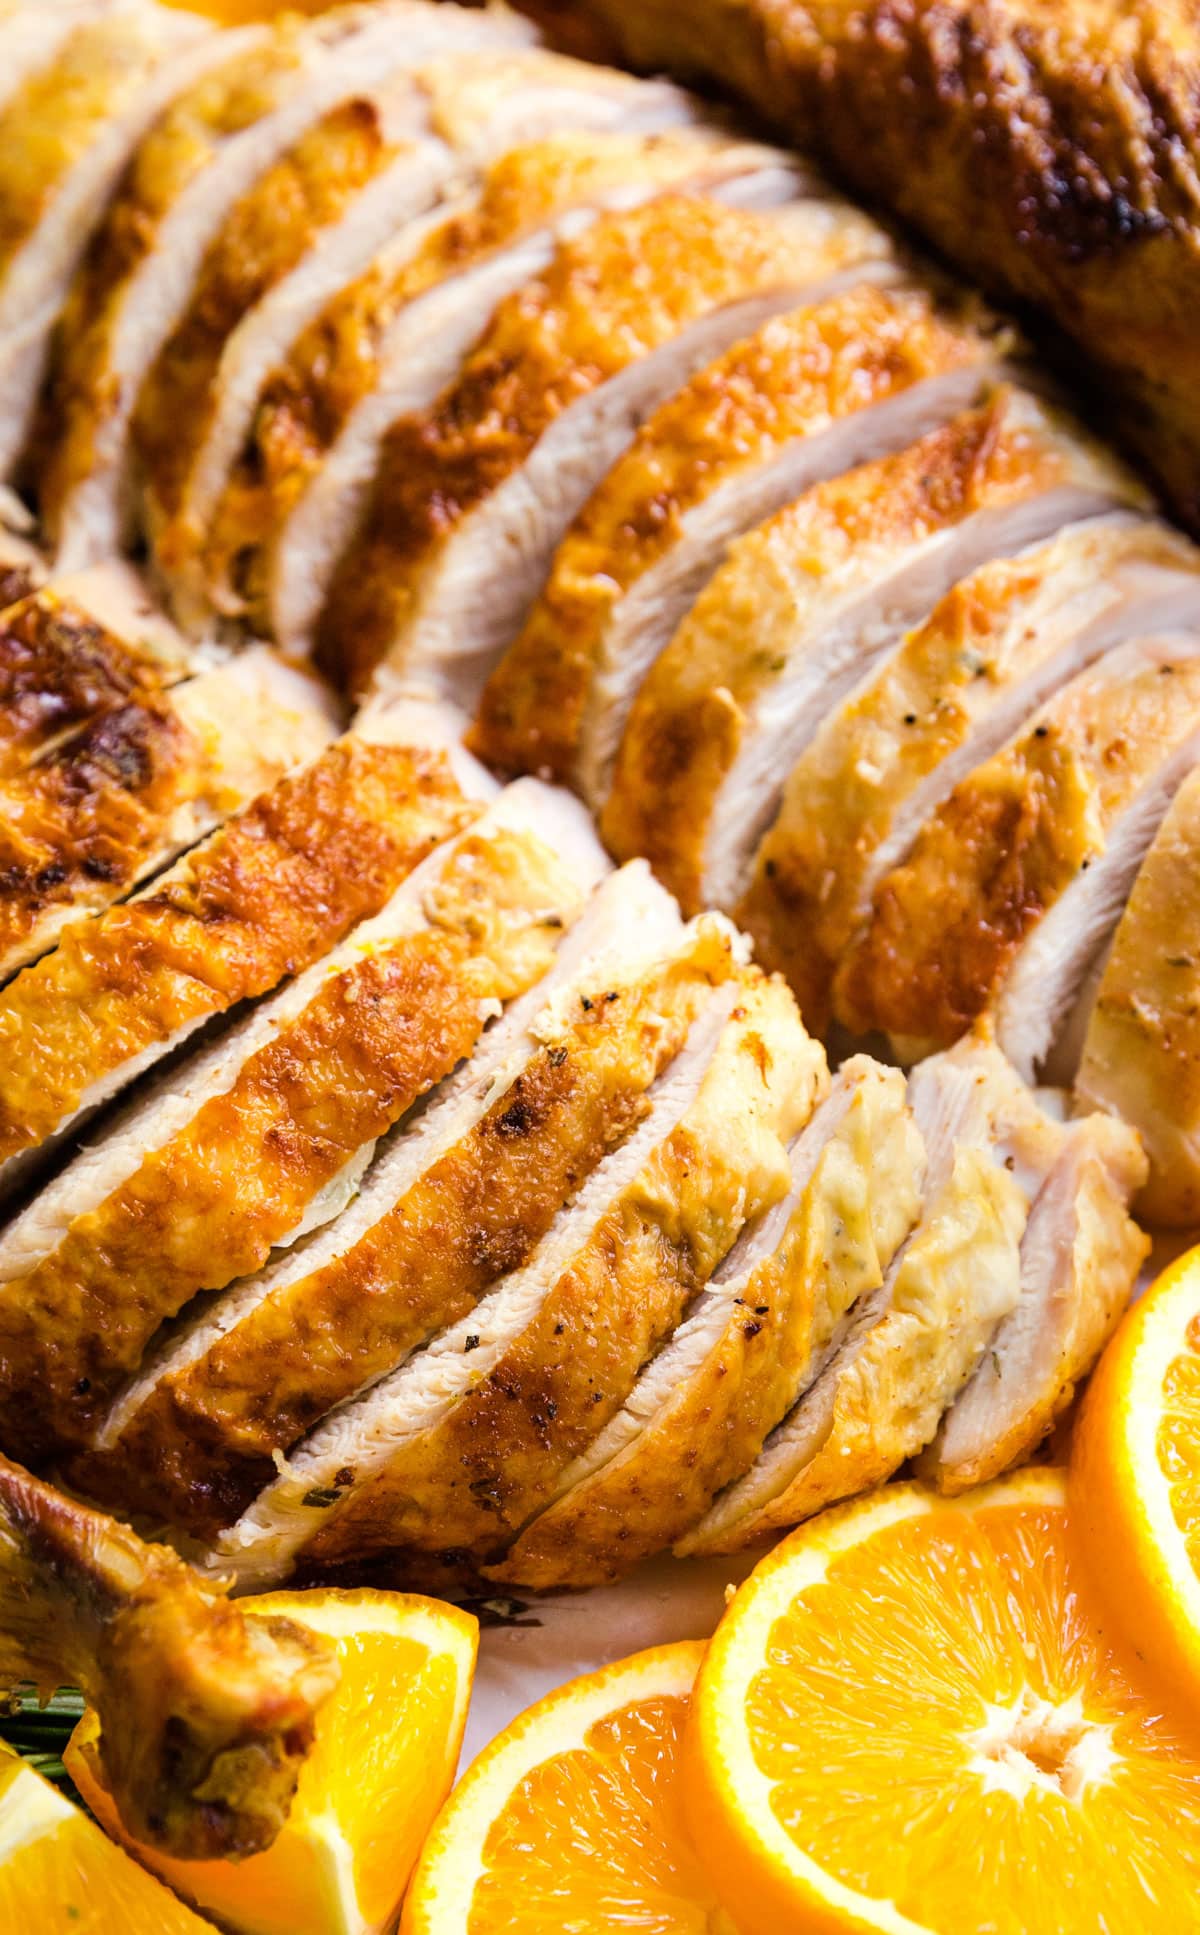 A close up image of juicy, perfectly sliced turkey with orange slices next to it.